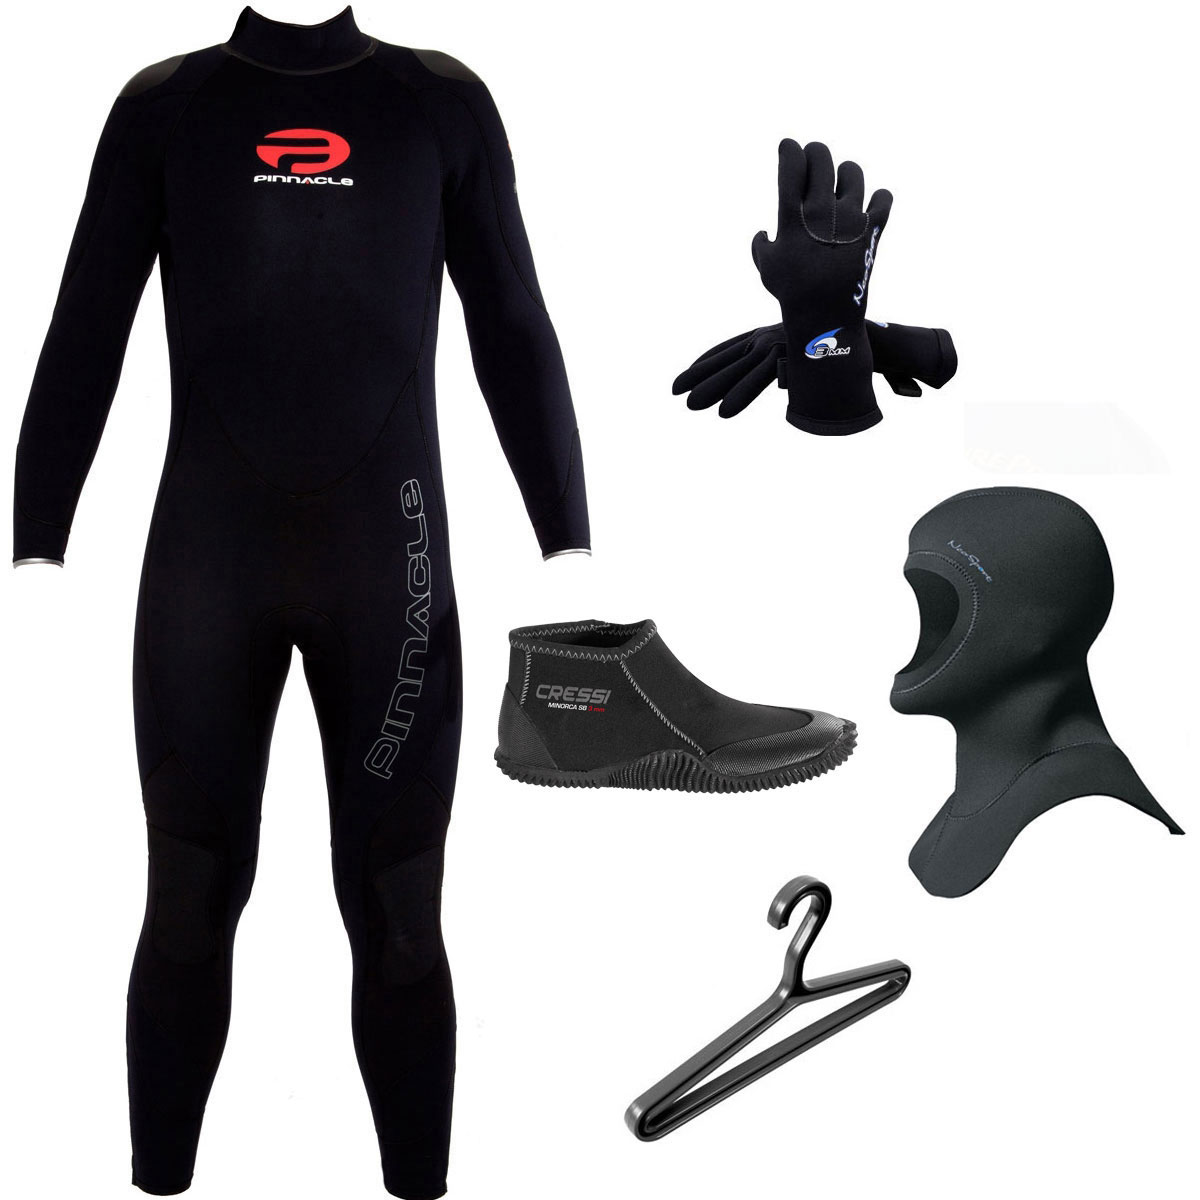 Wetsuit Packages